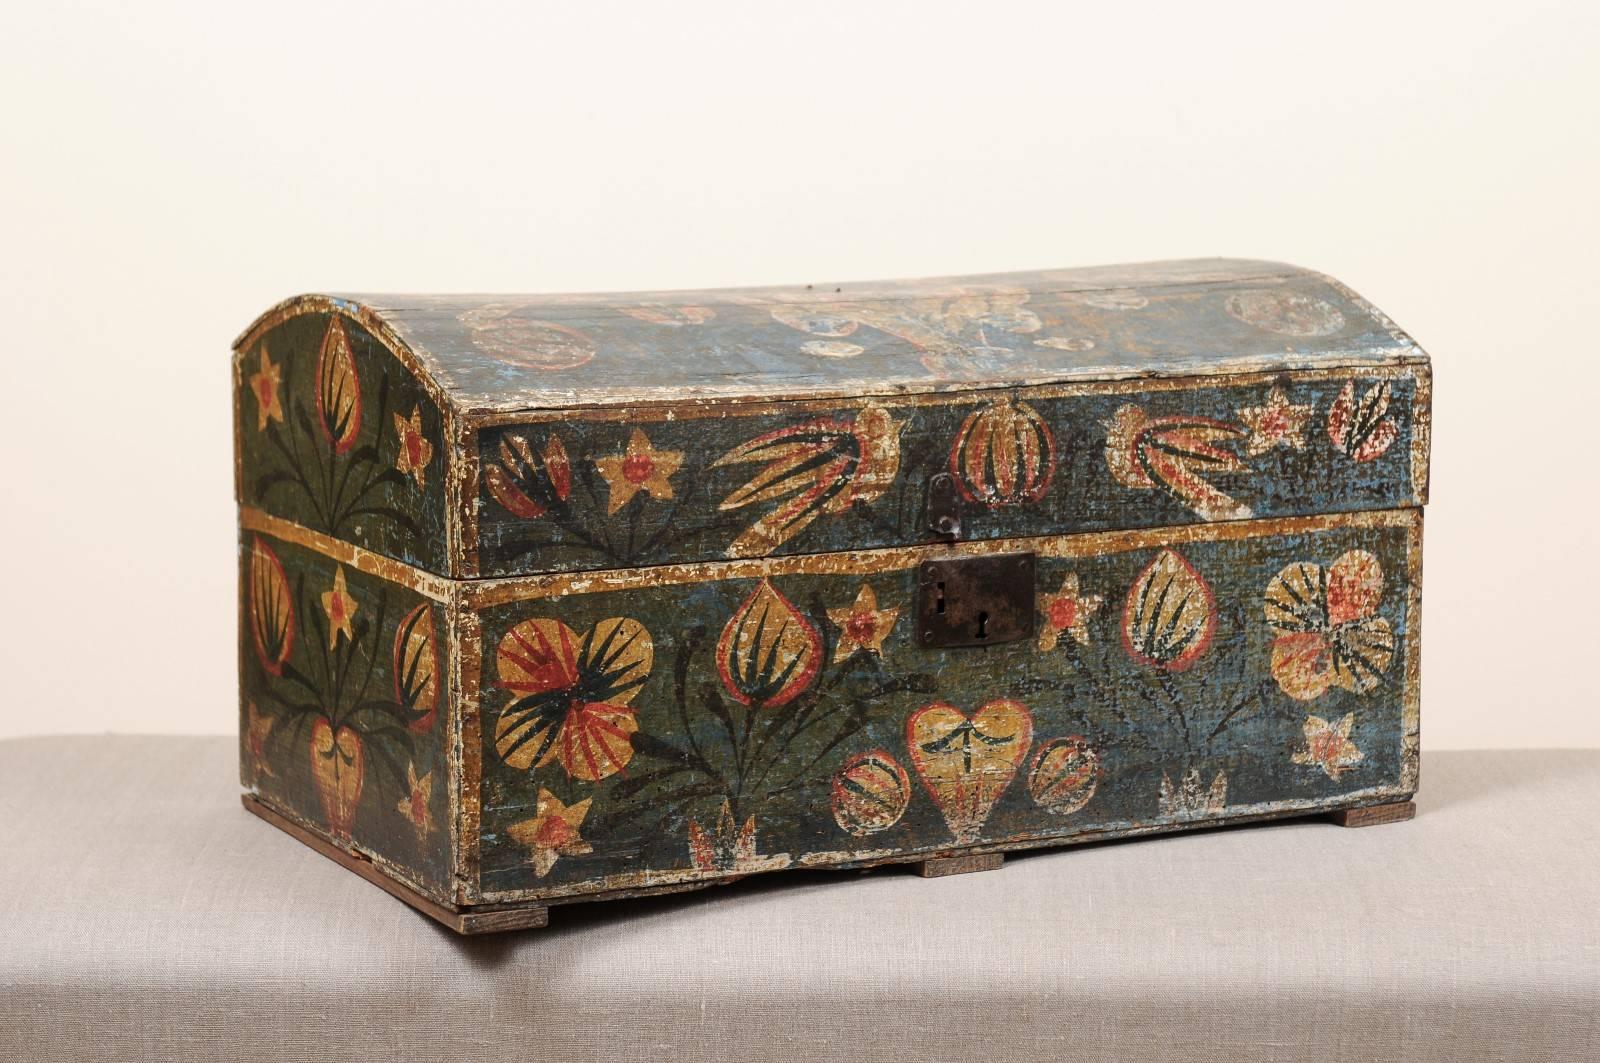 Large distressed blue-painted brides box featuring flower vase and bird decoration in orange-red and mustard hues, domed top and hinged lid, Sweden, 19th century. The back side of the box is unfinished.